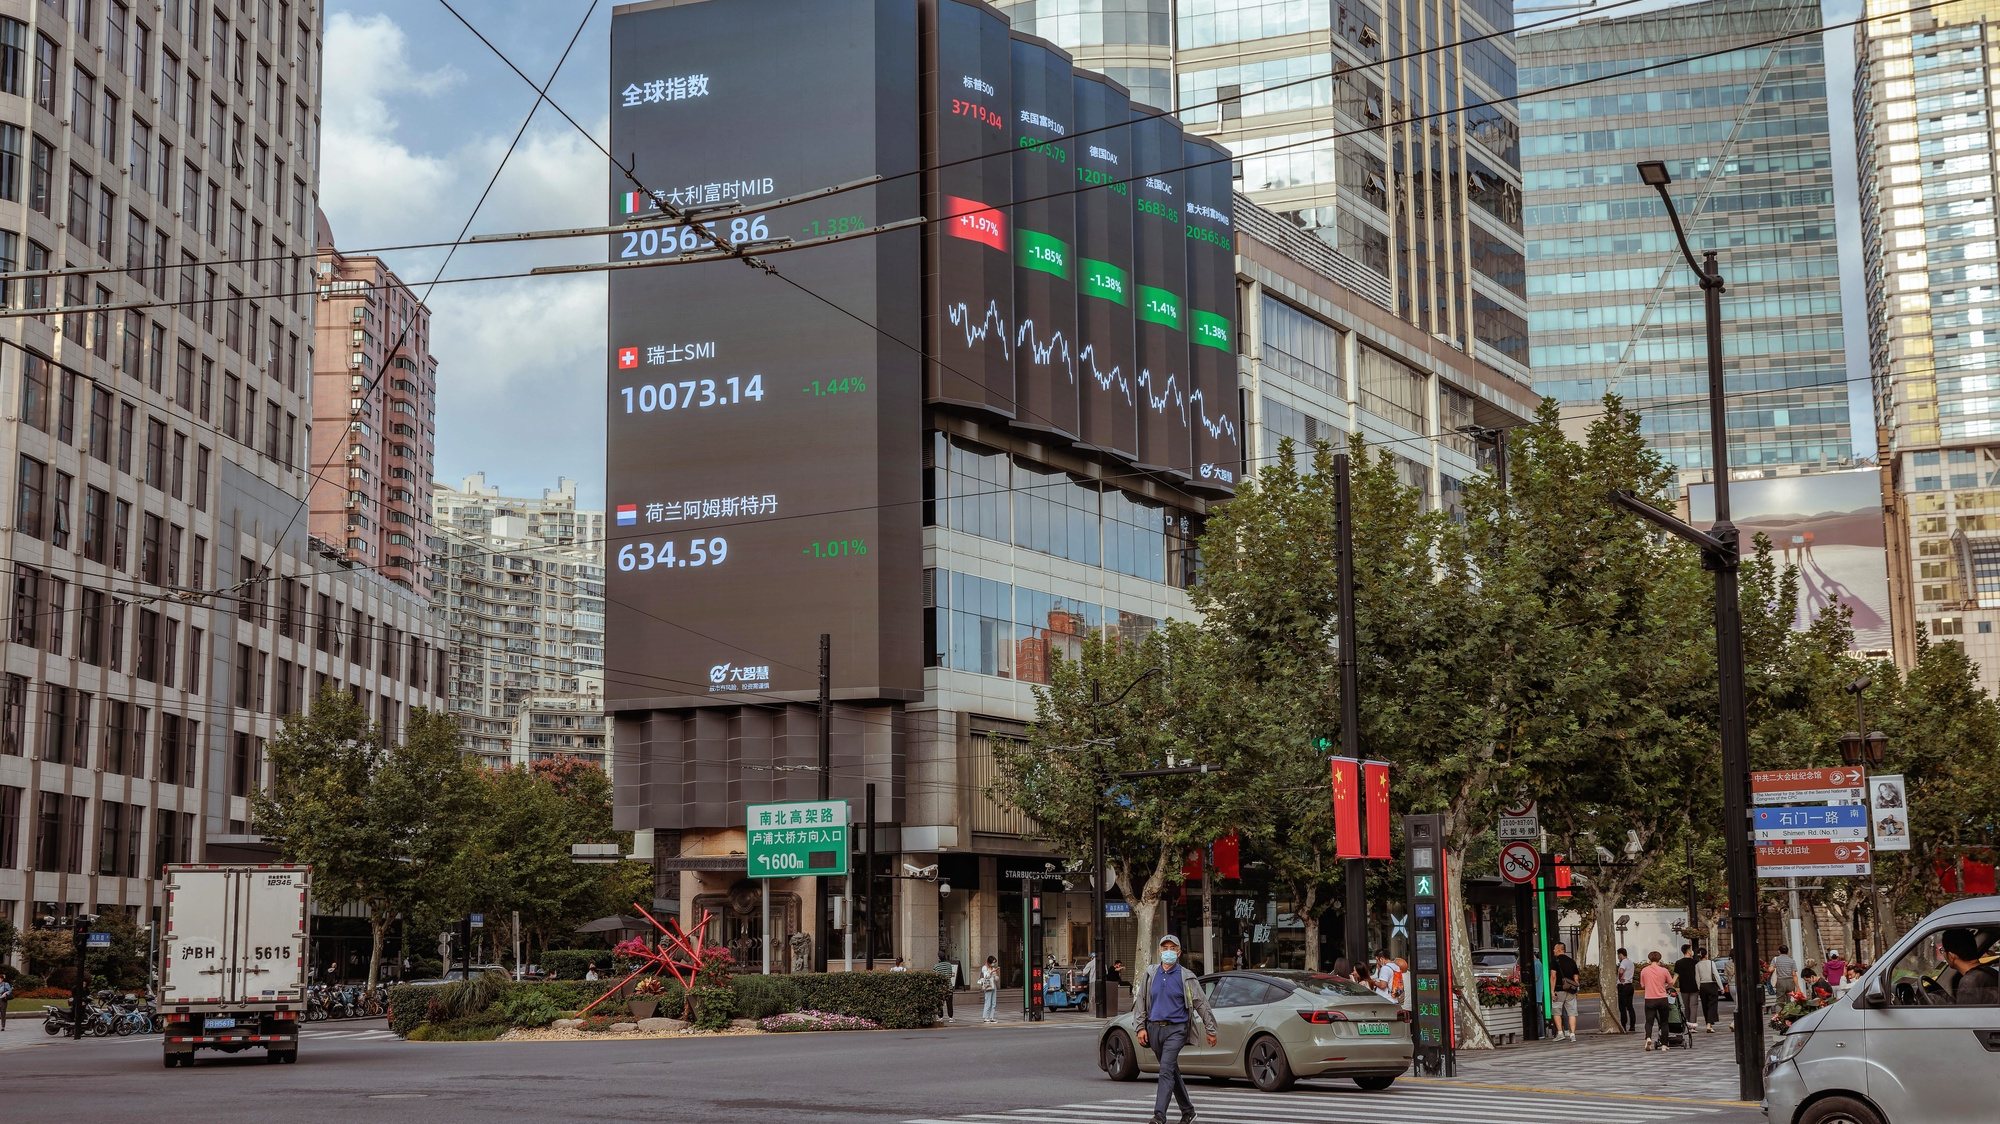 epa10213297 A man walks past the large screen showing latest stock and currency exchange data, in Shanghai, China, 29 September 2022. China&#039;s yuan hit a record low against the US dollar on 28 September, the weakest since the global crisis in 2008, despite the central bank taking steps to rein in the currency weakness.  EPA/ALEX PLAVEVSKI